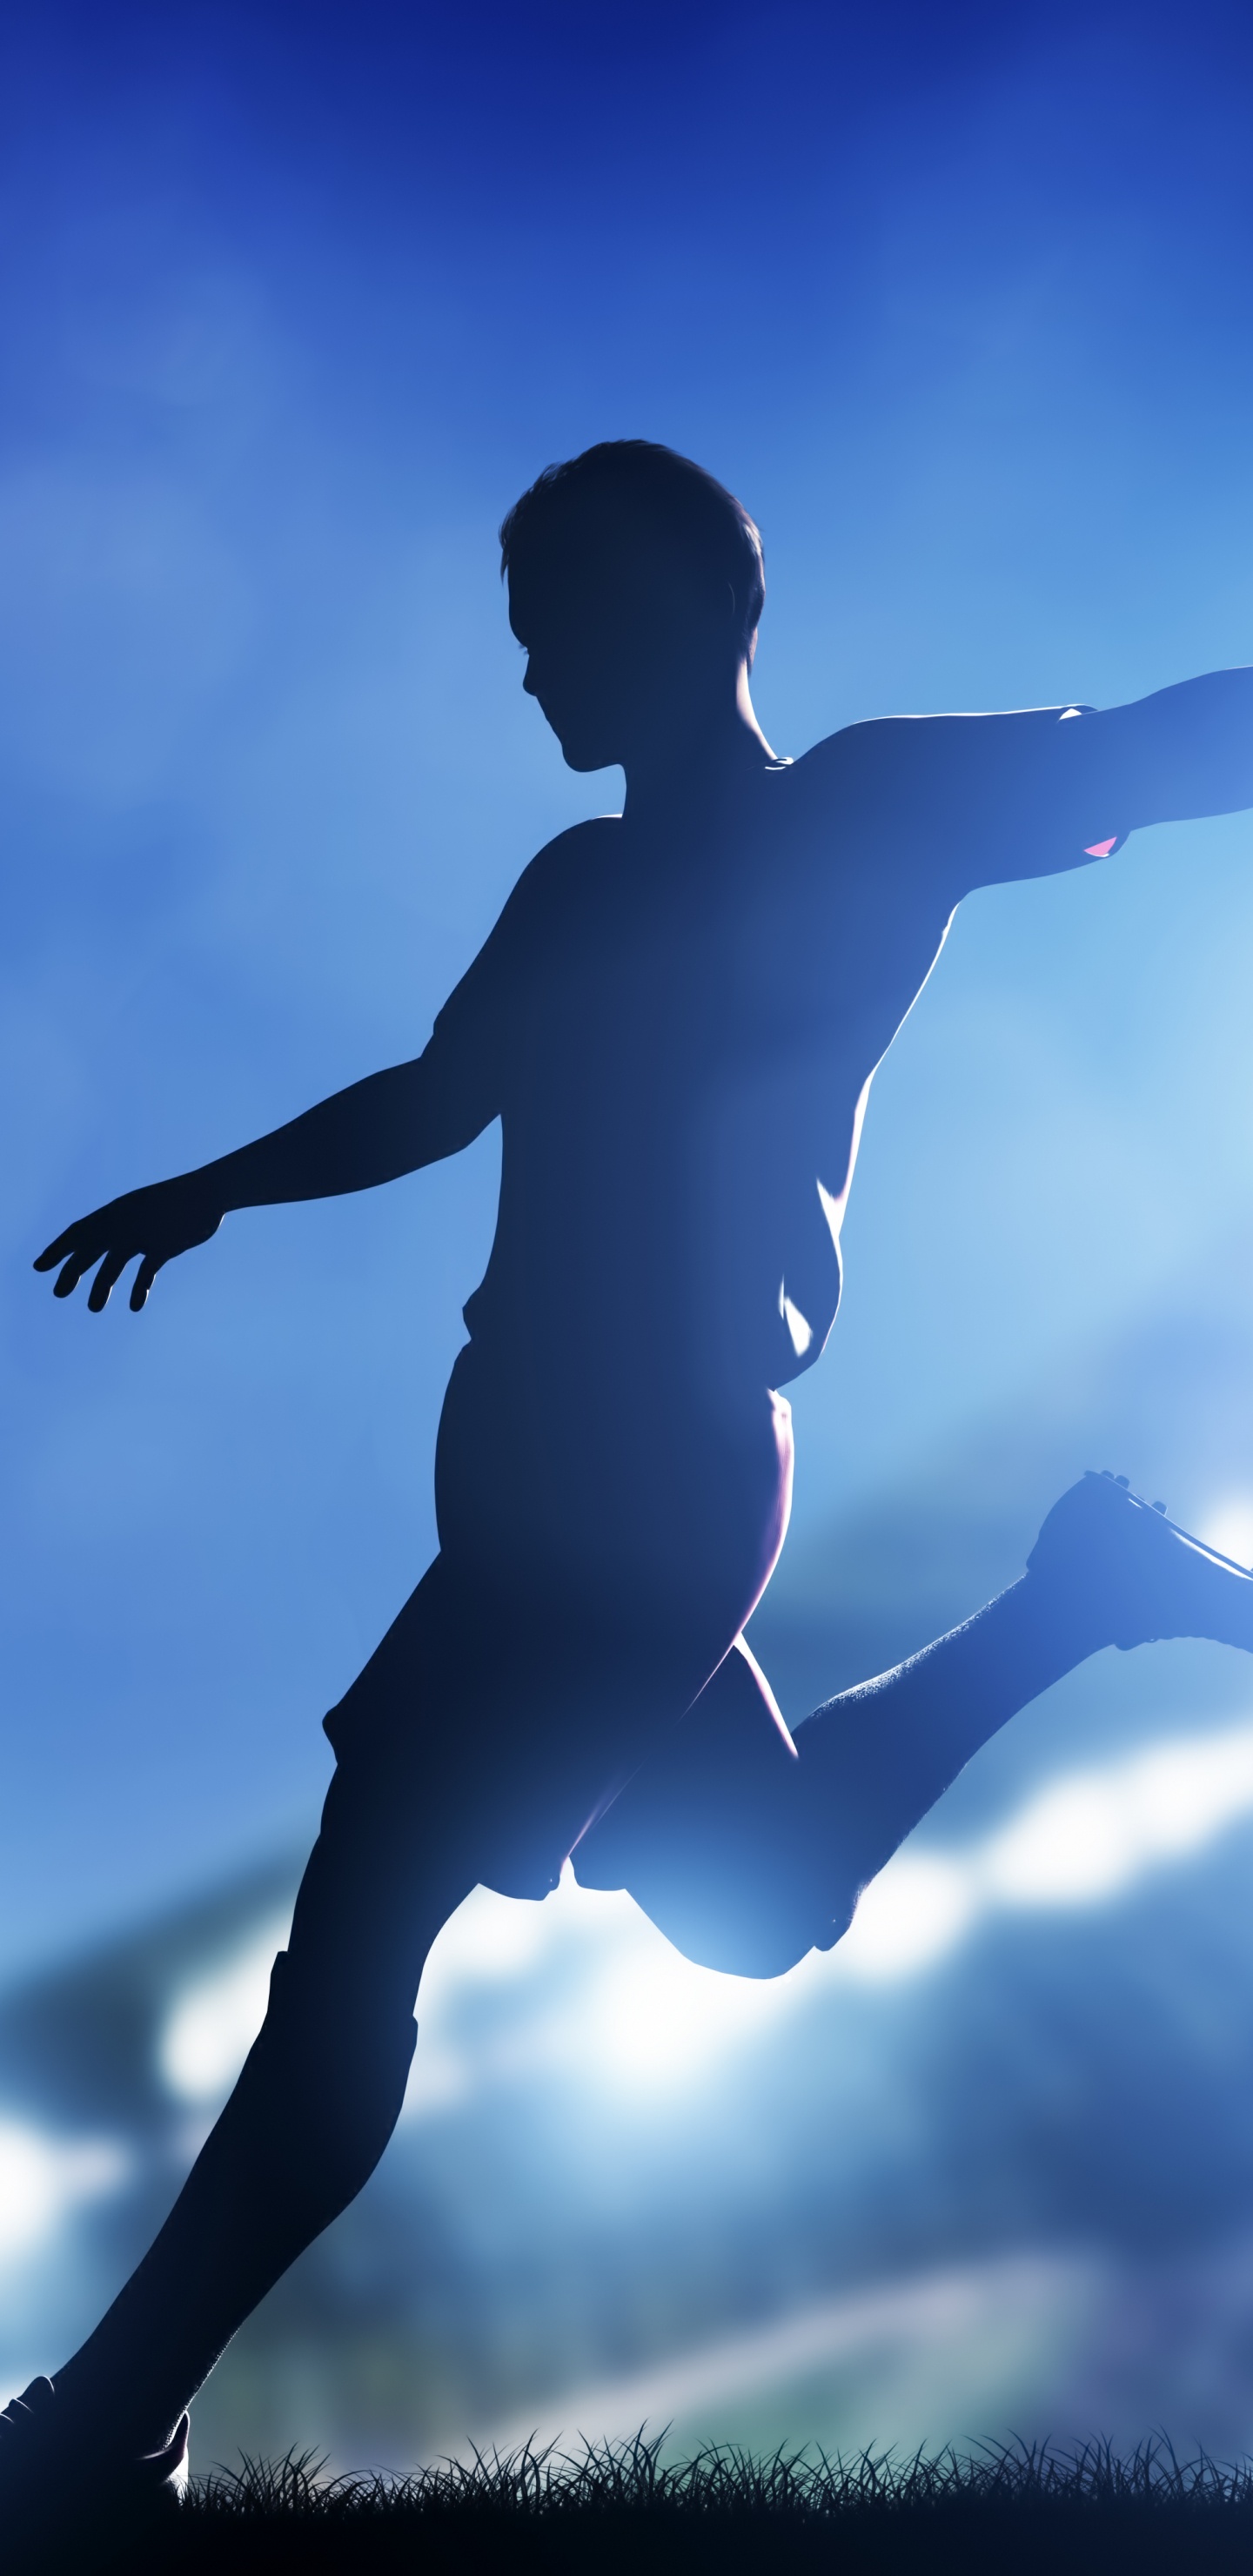 Man in Black Shorts Playing Soccer Ball. Wallpaper in 1440x2960 Resolution